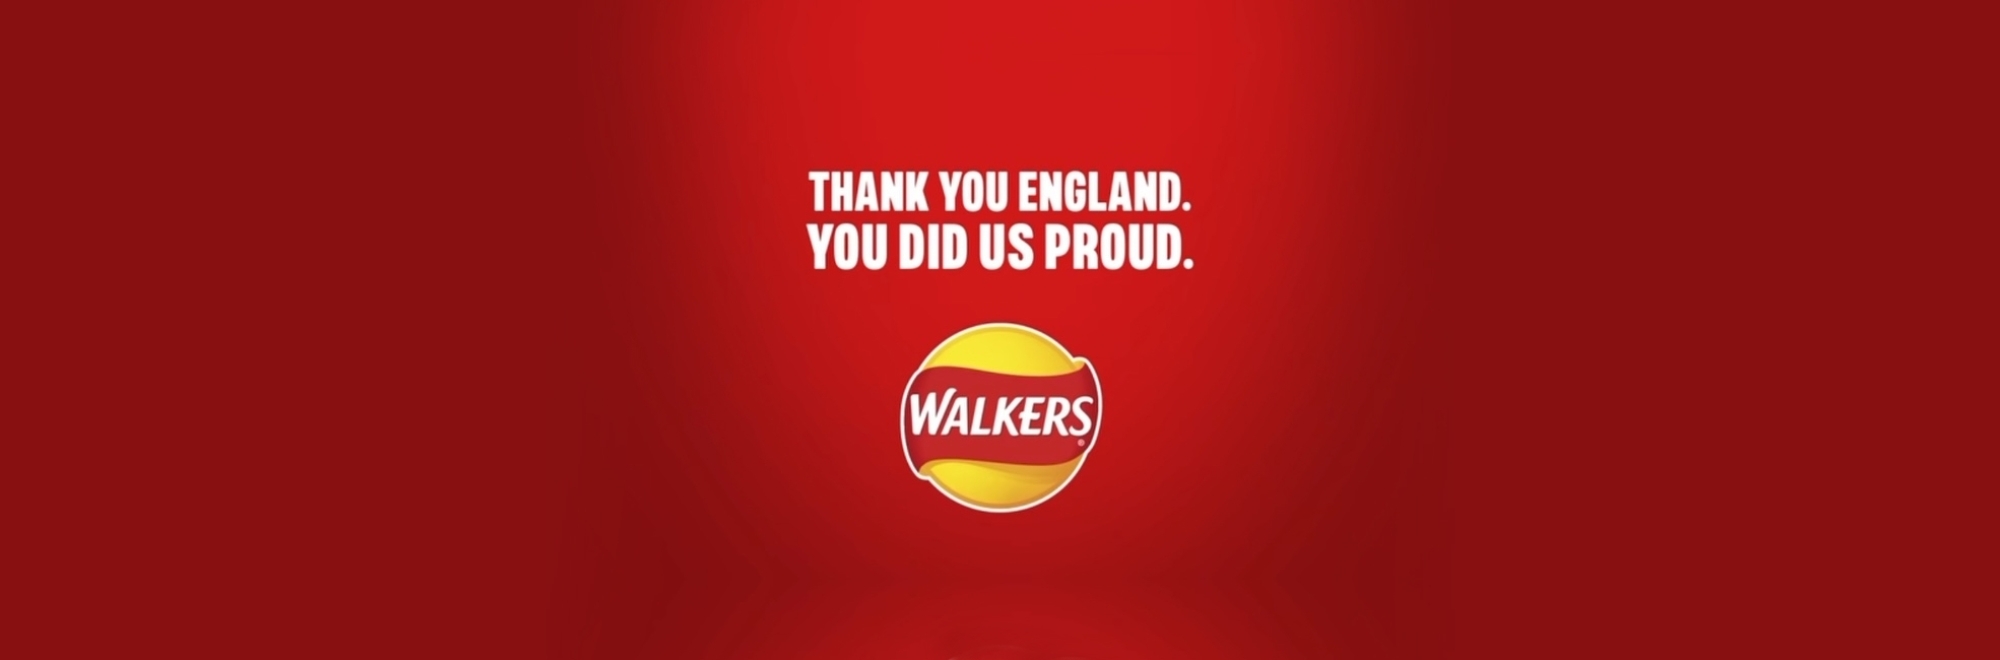 Fair play Walkers, you've got game